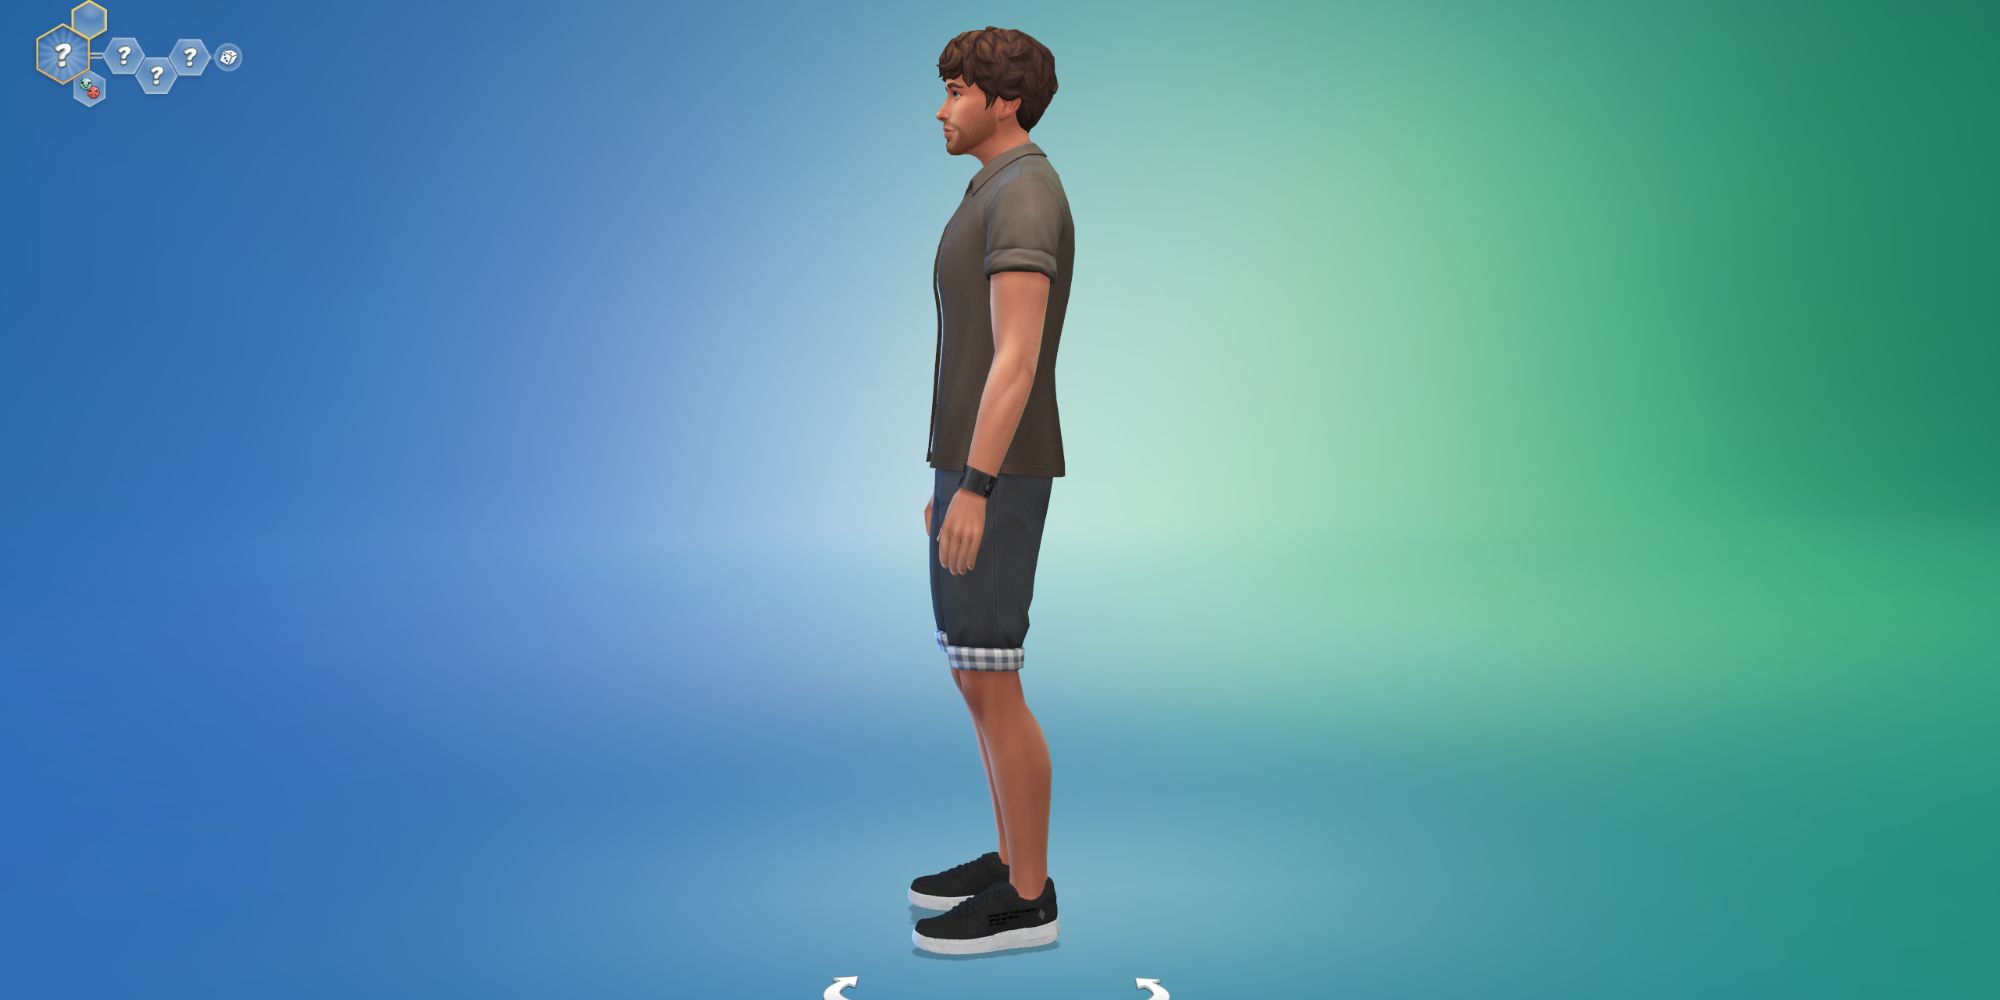 Walking & Talking poses by r-jayden - The Sims 4 Download - SimsFinds.com